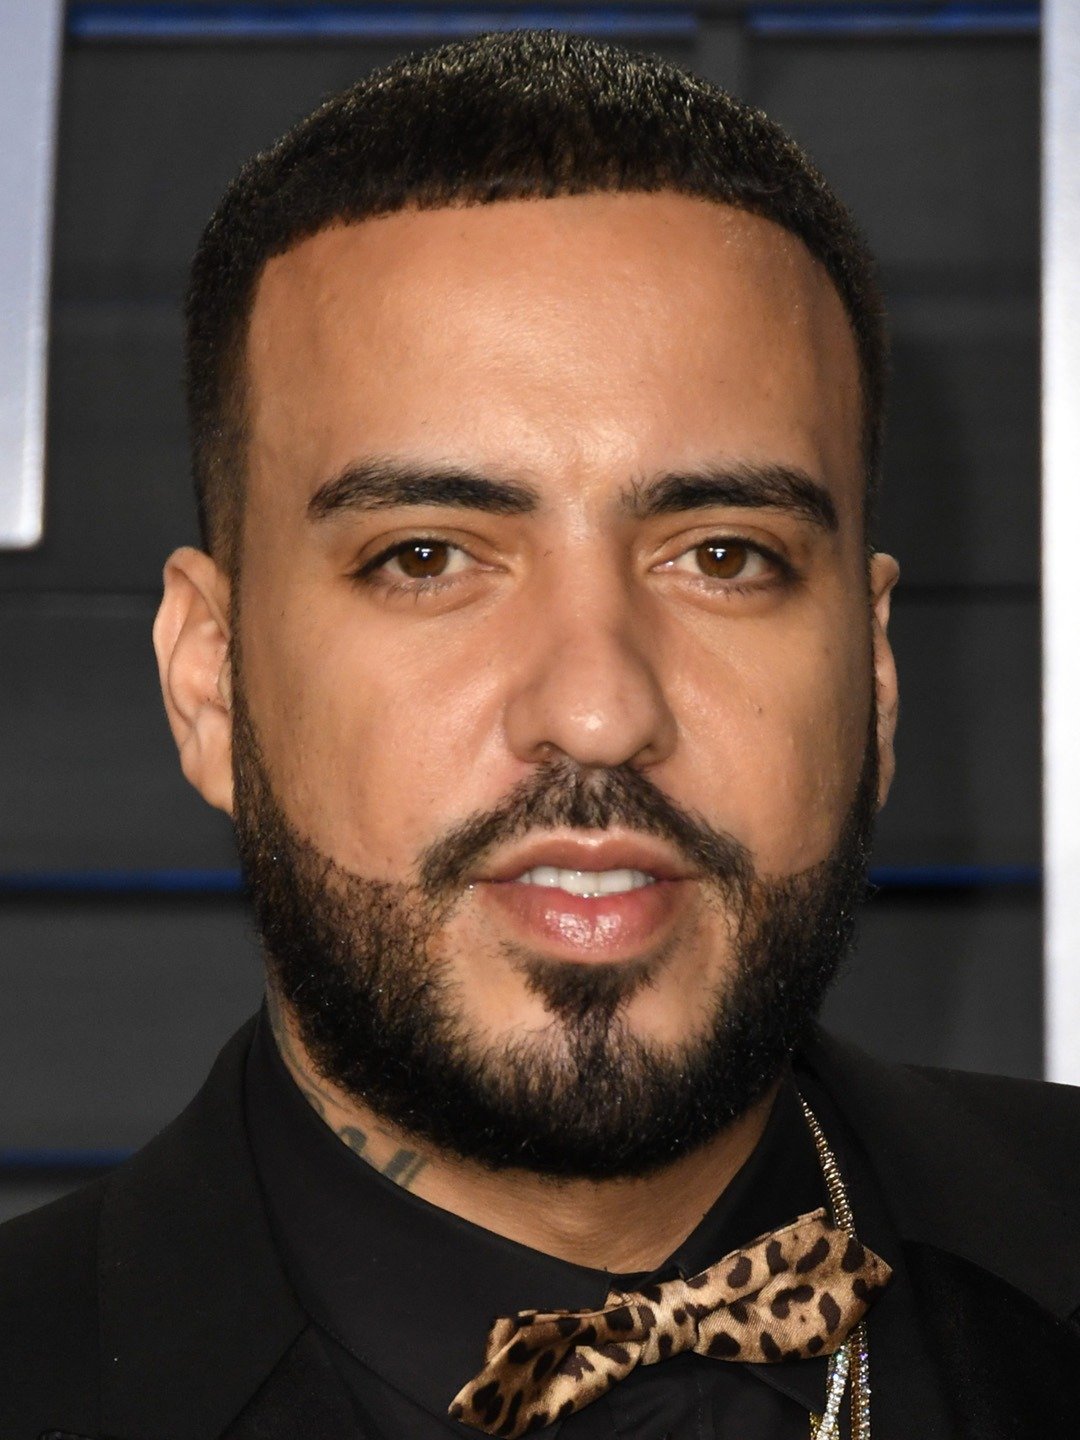 How tall is French Montana?